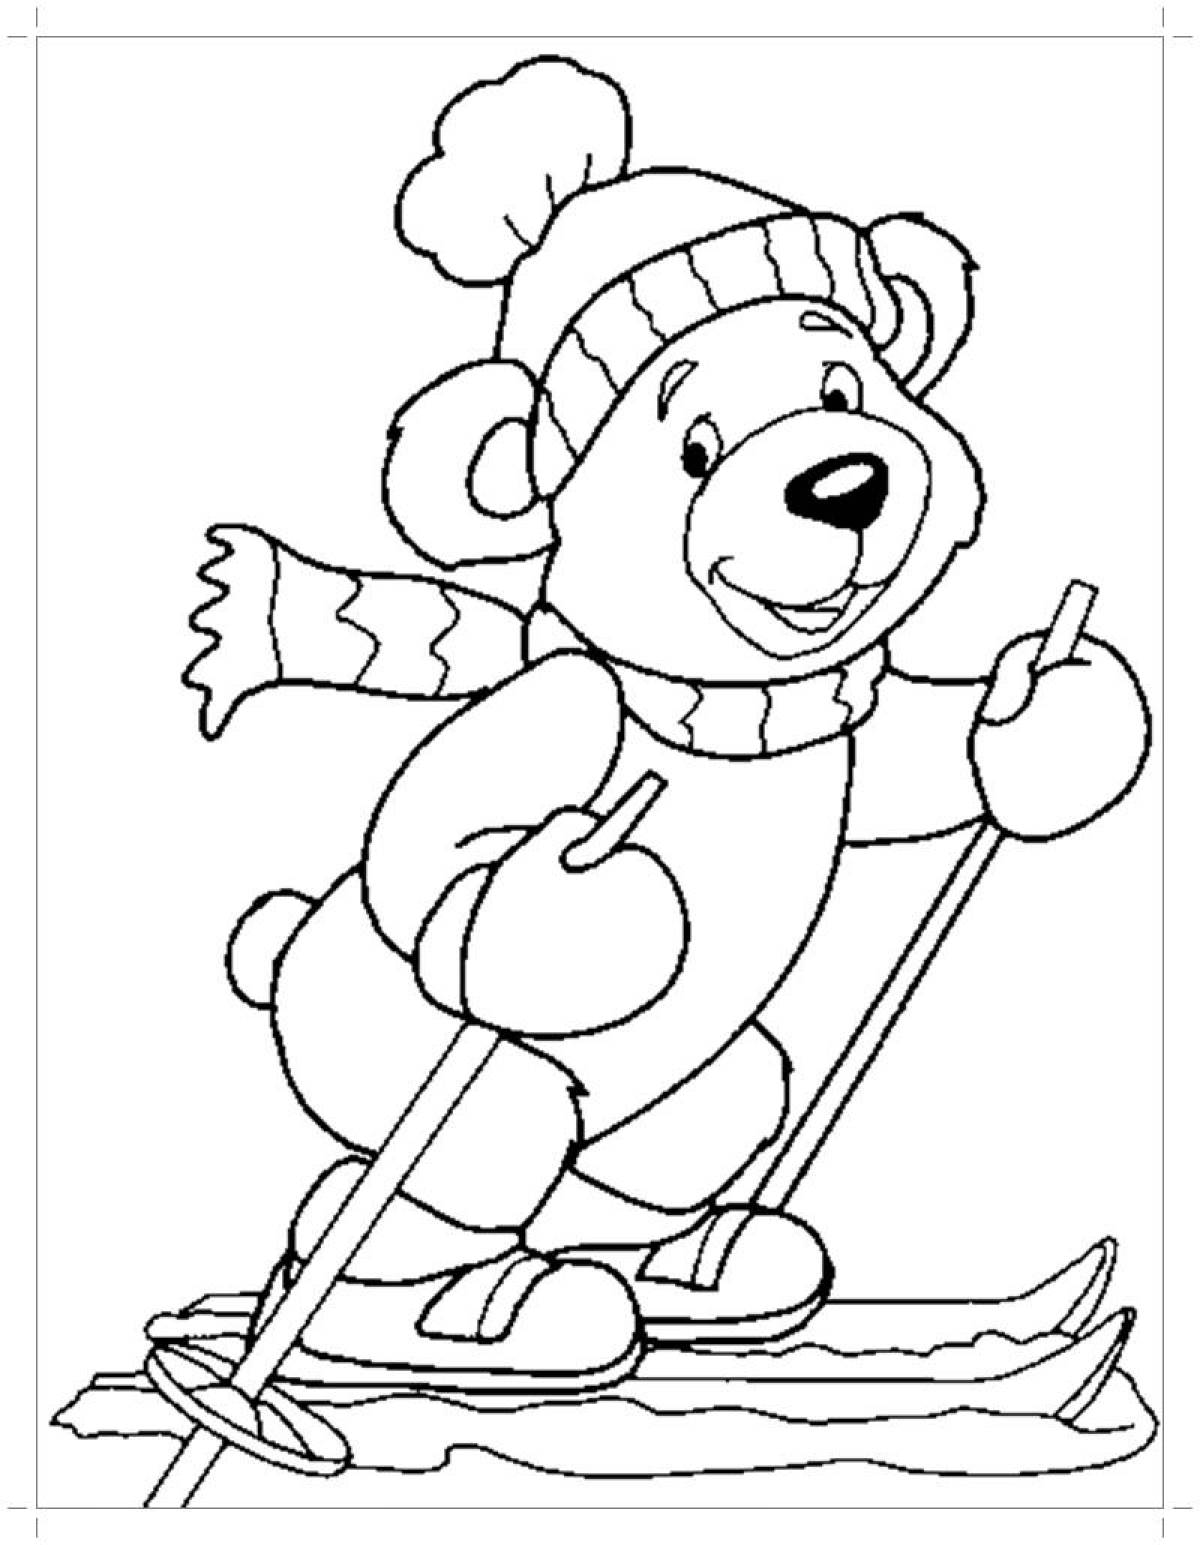 A fascinating winter coloring book for children 4-5 years old